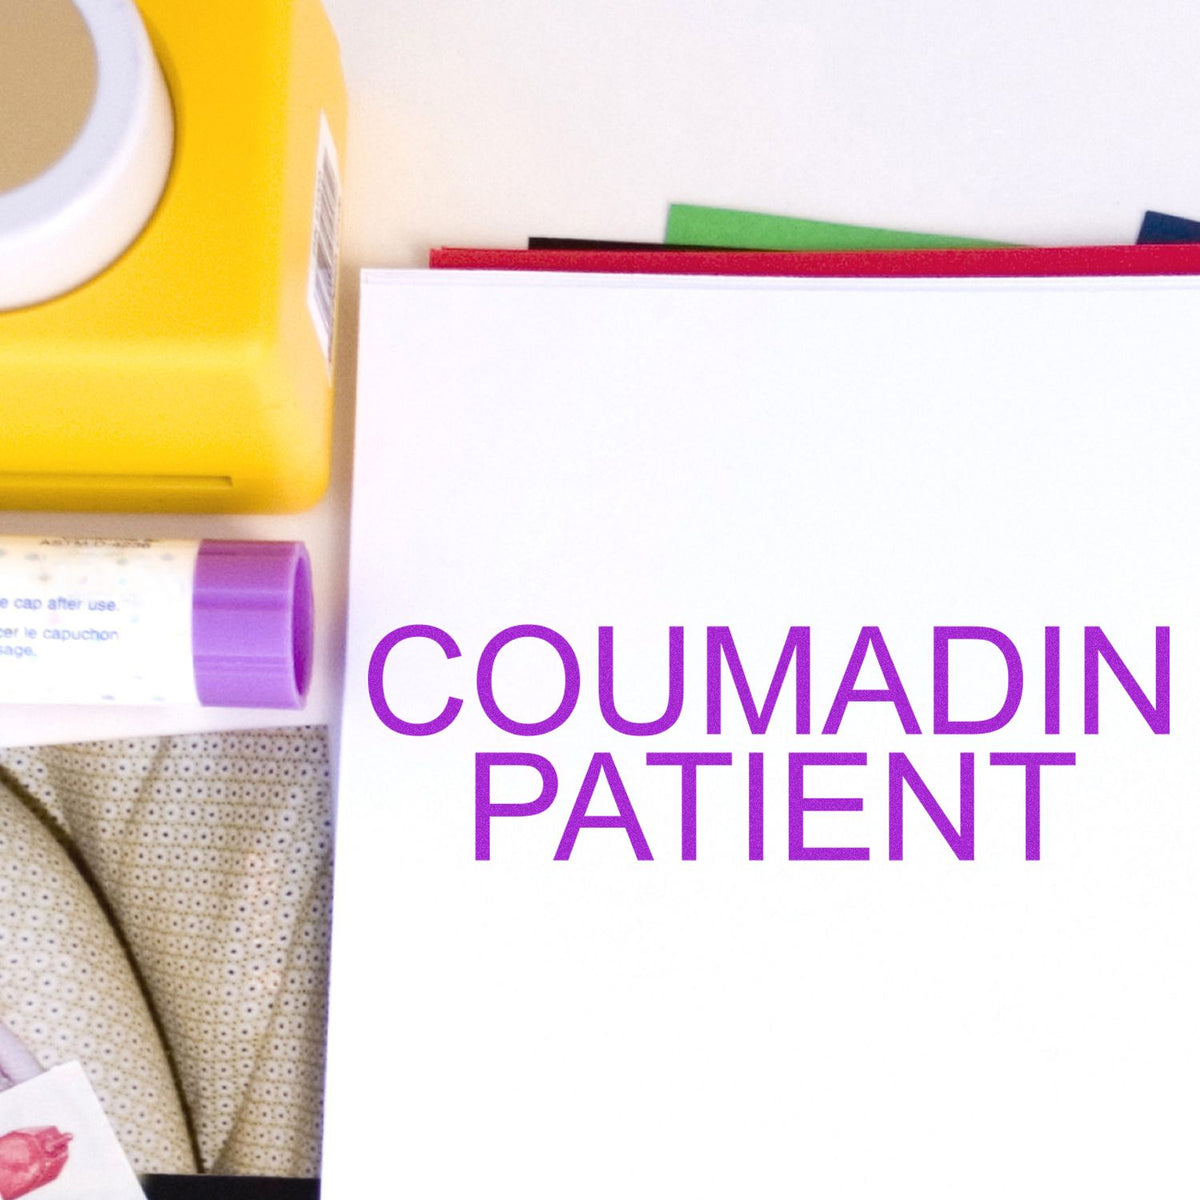 Coumadin Patient Rubber Stamp In Use